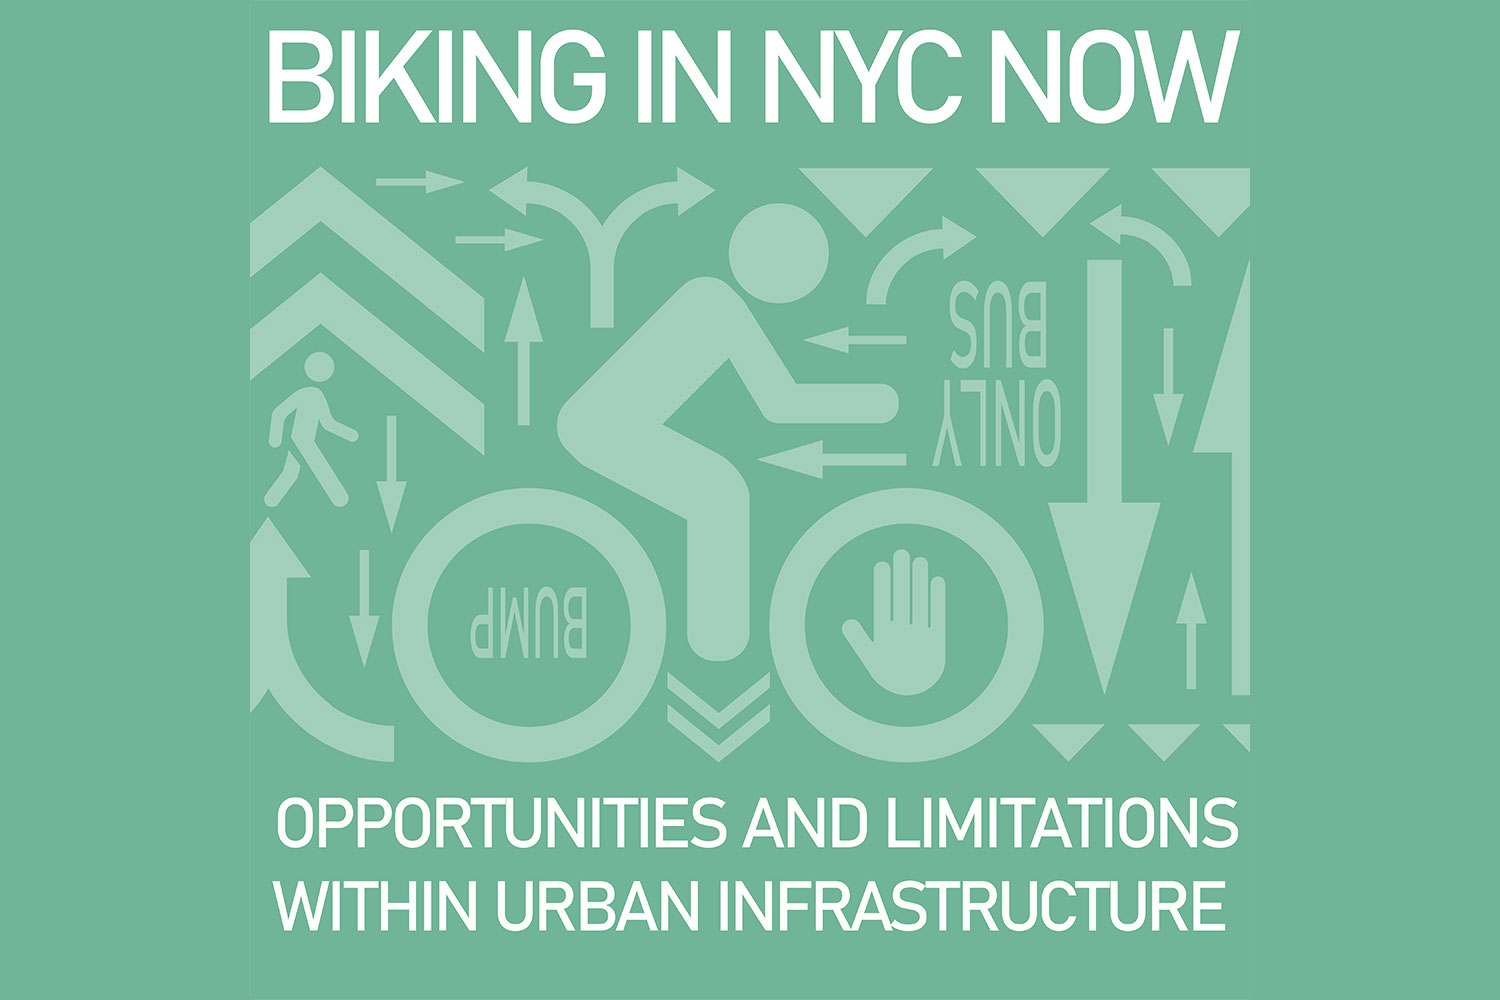 Biking in NYC Now event poster